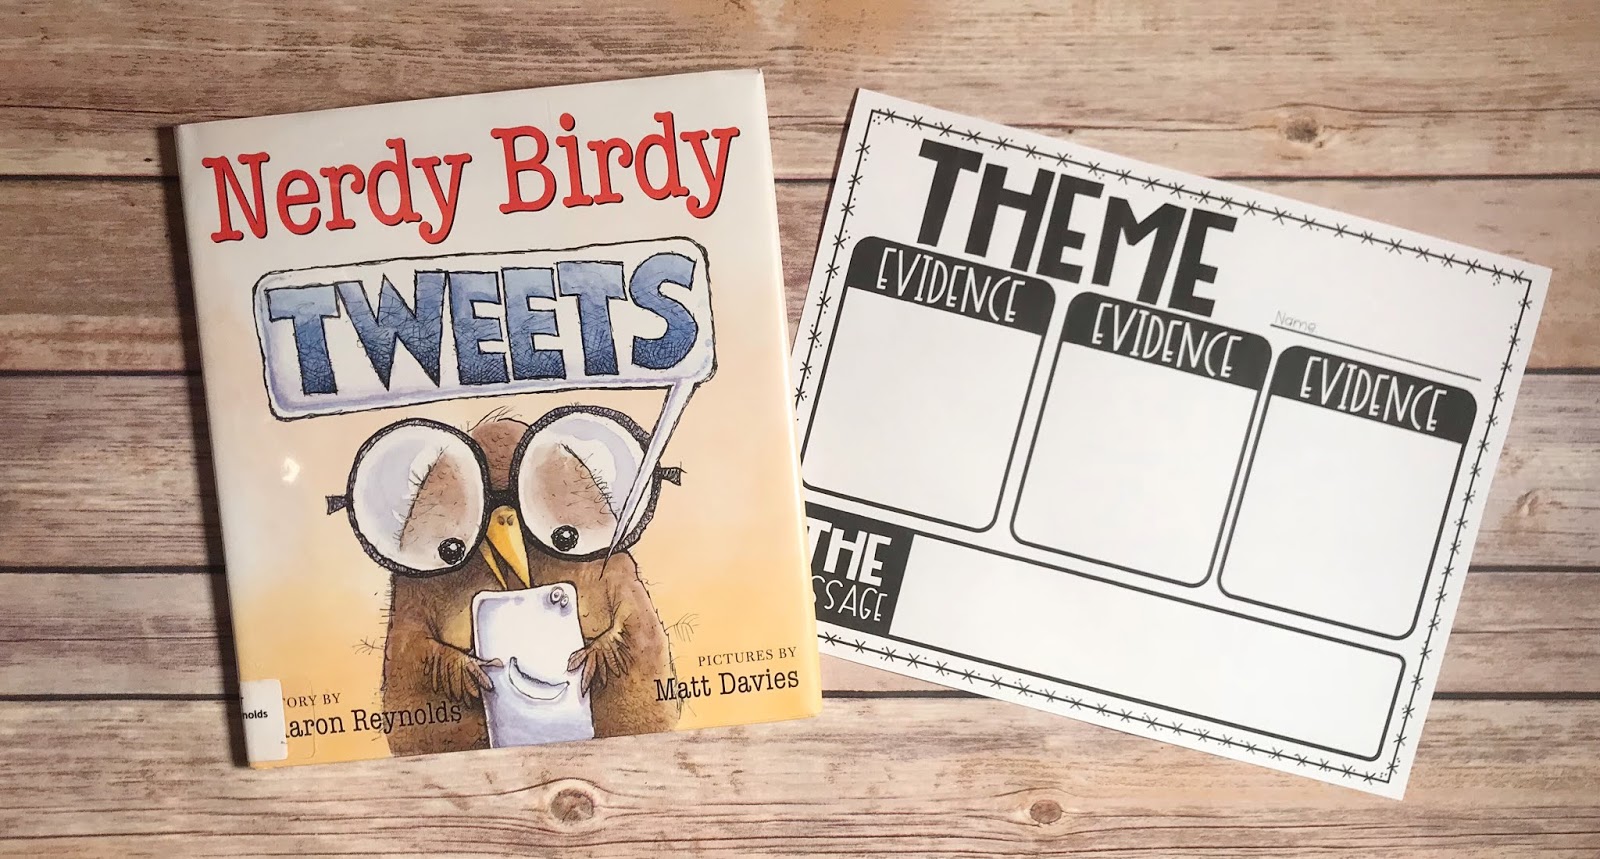 Picture Book with text "Nerdy Birdy Tweets" and Theme Graphic Organizer